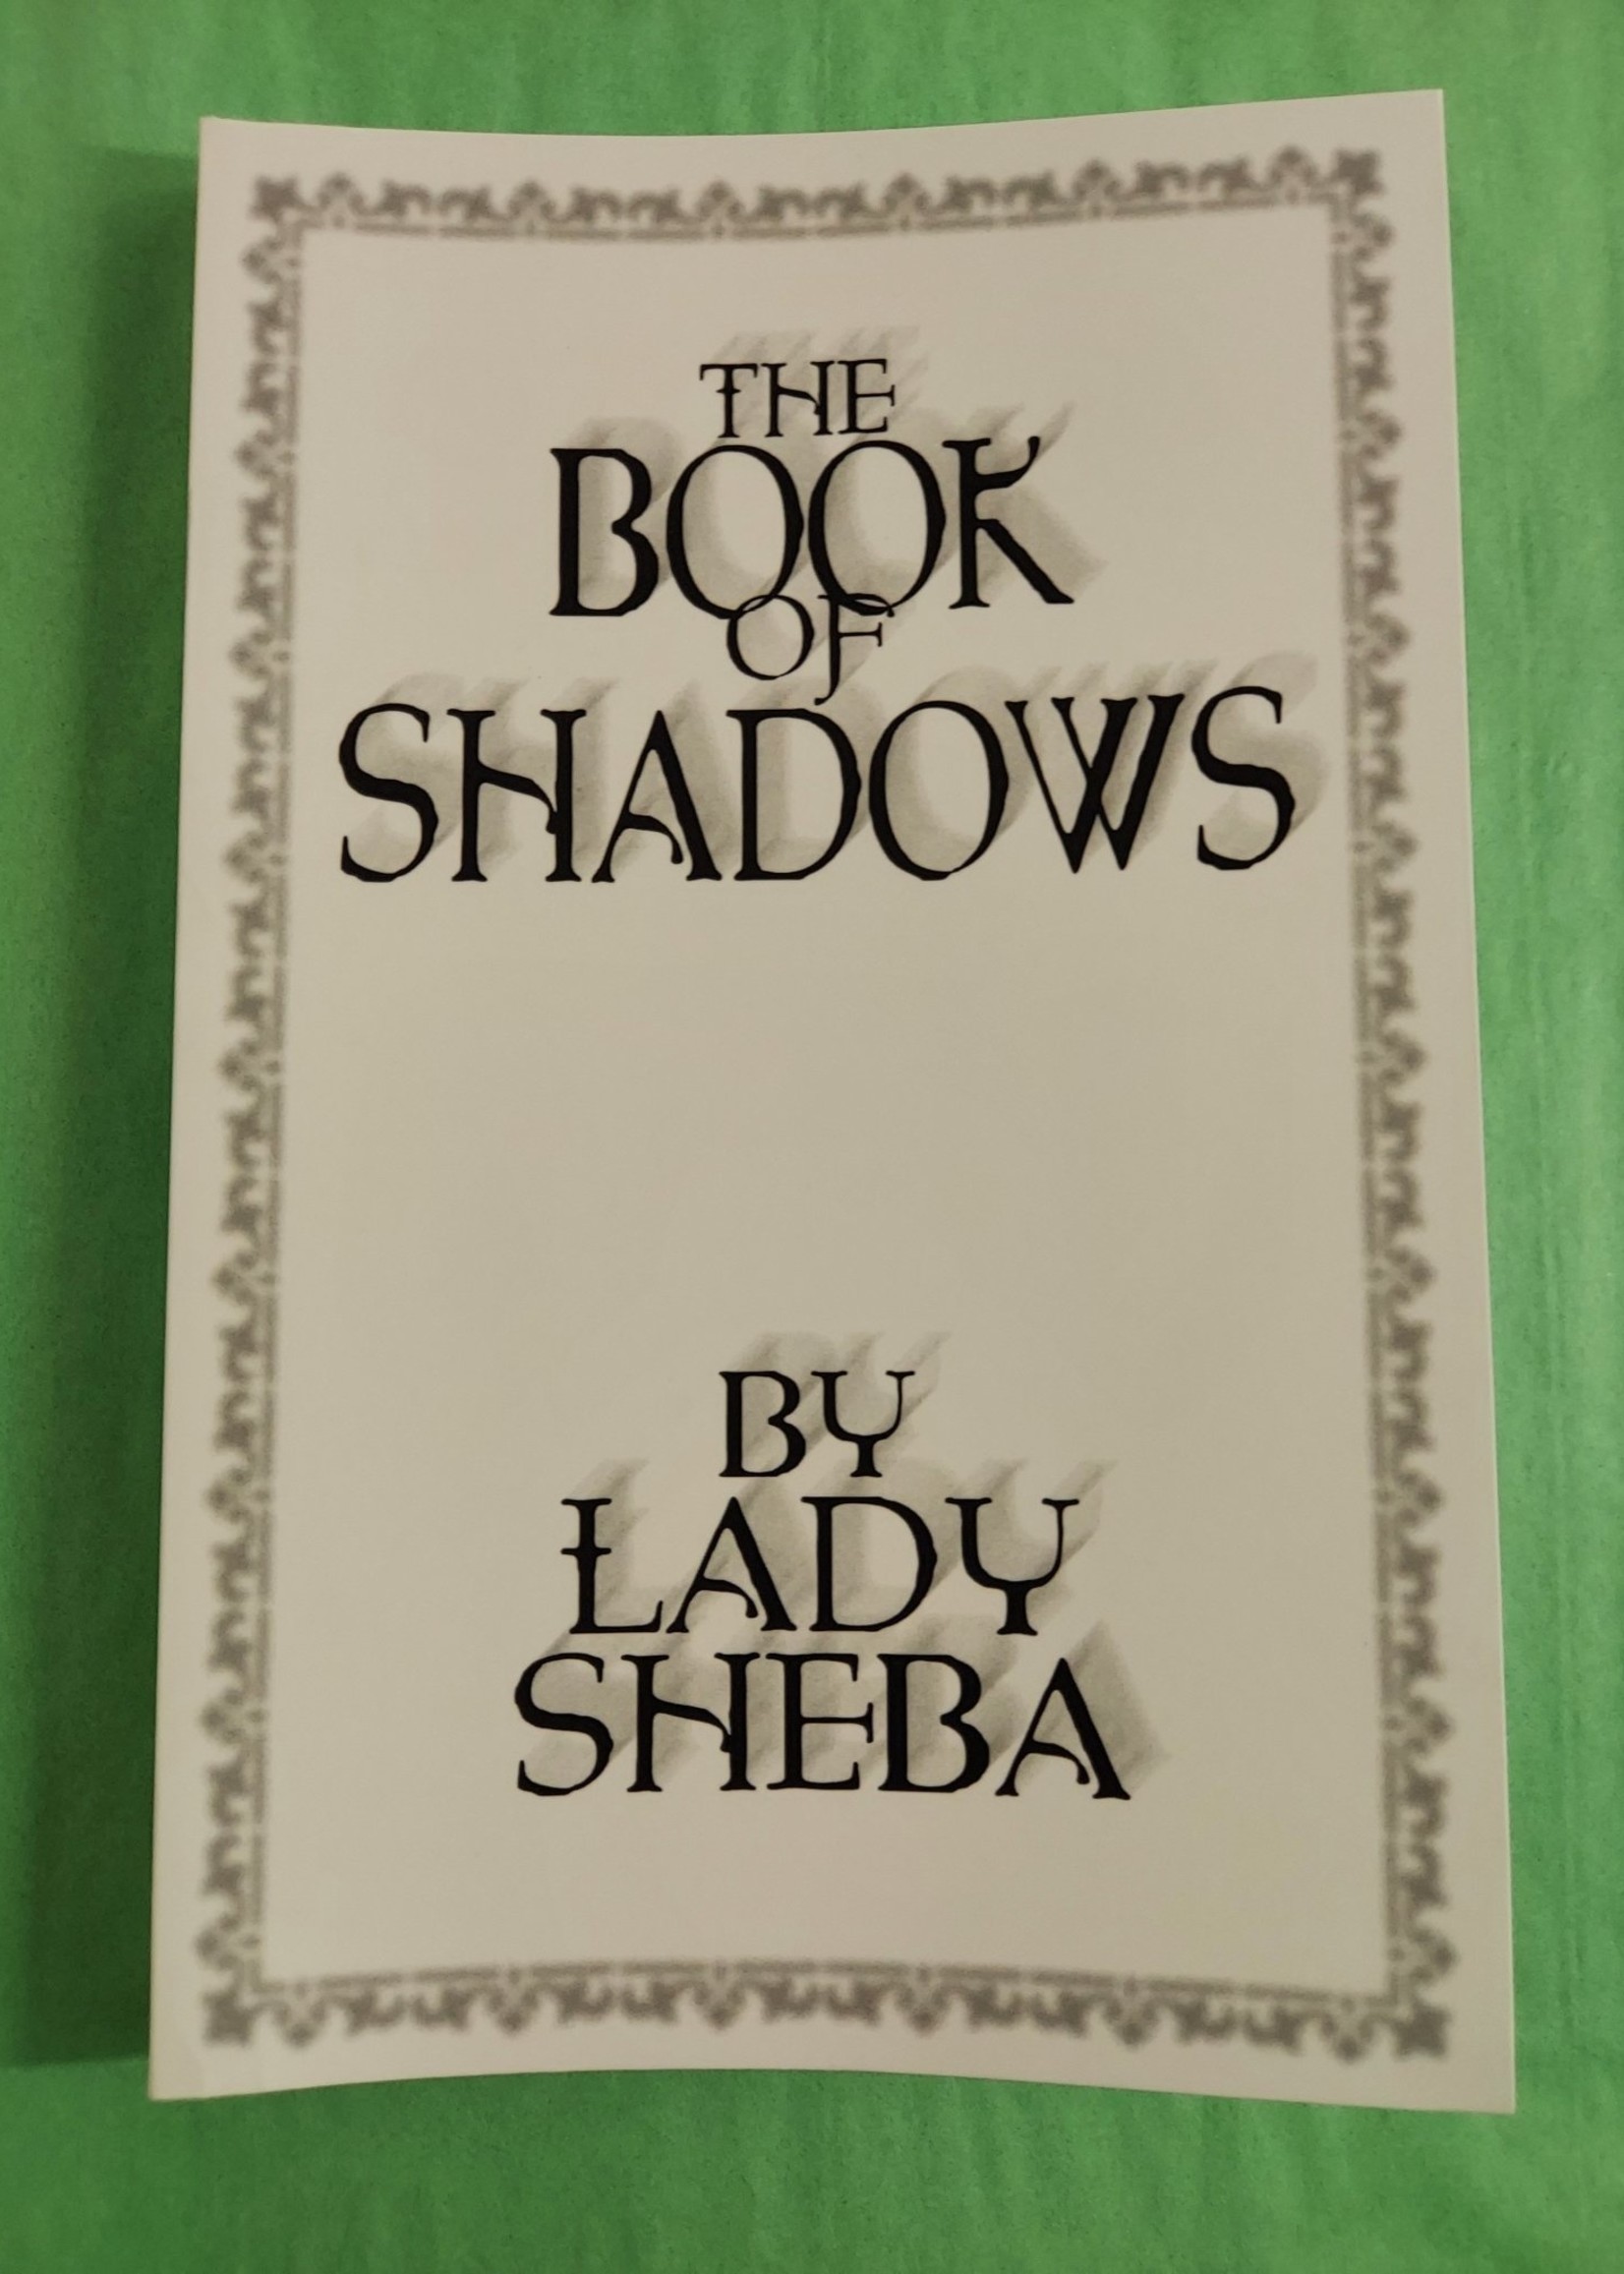 The Book of Shadows - by Lady Sheba